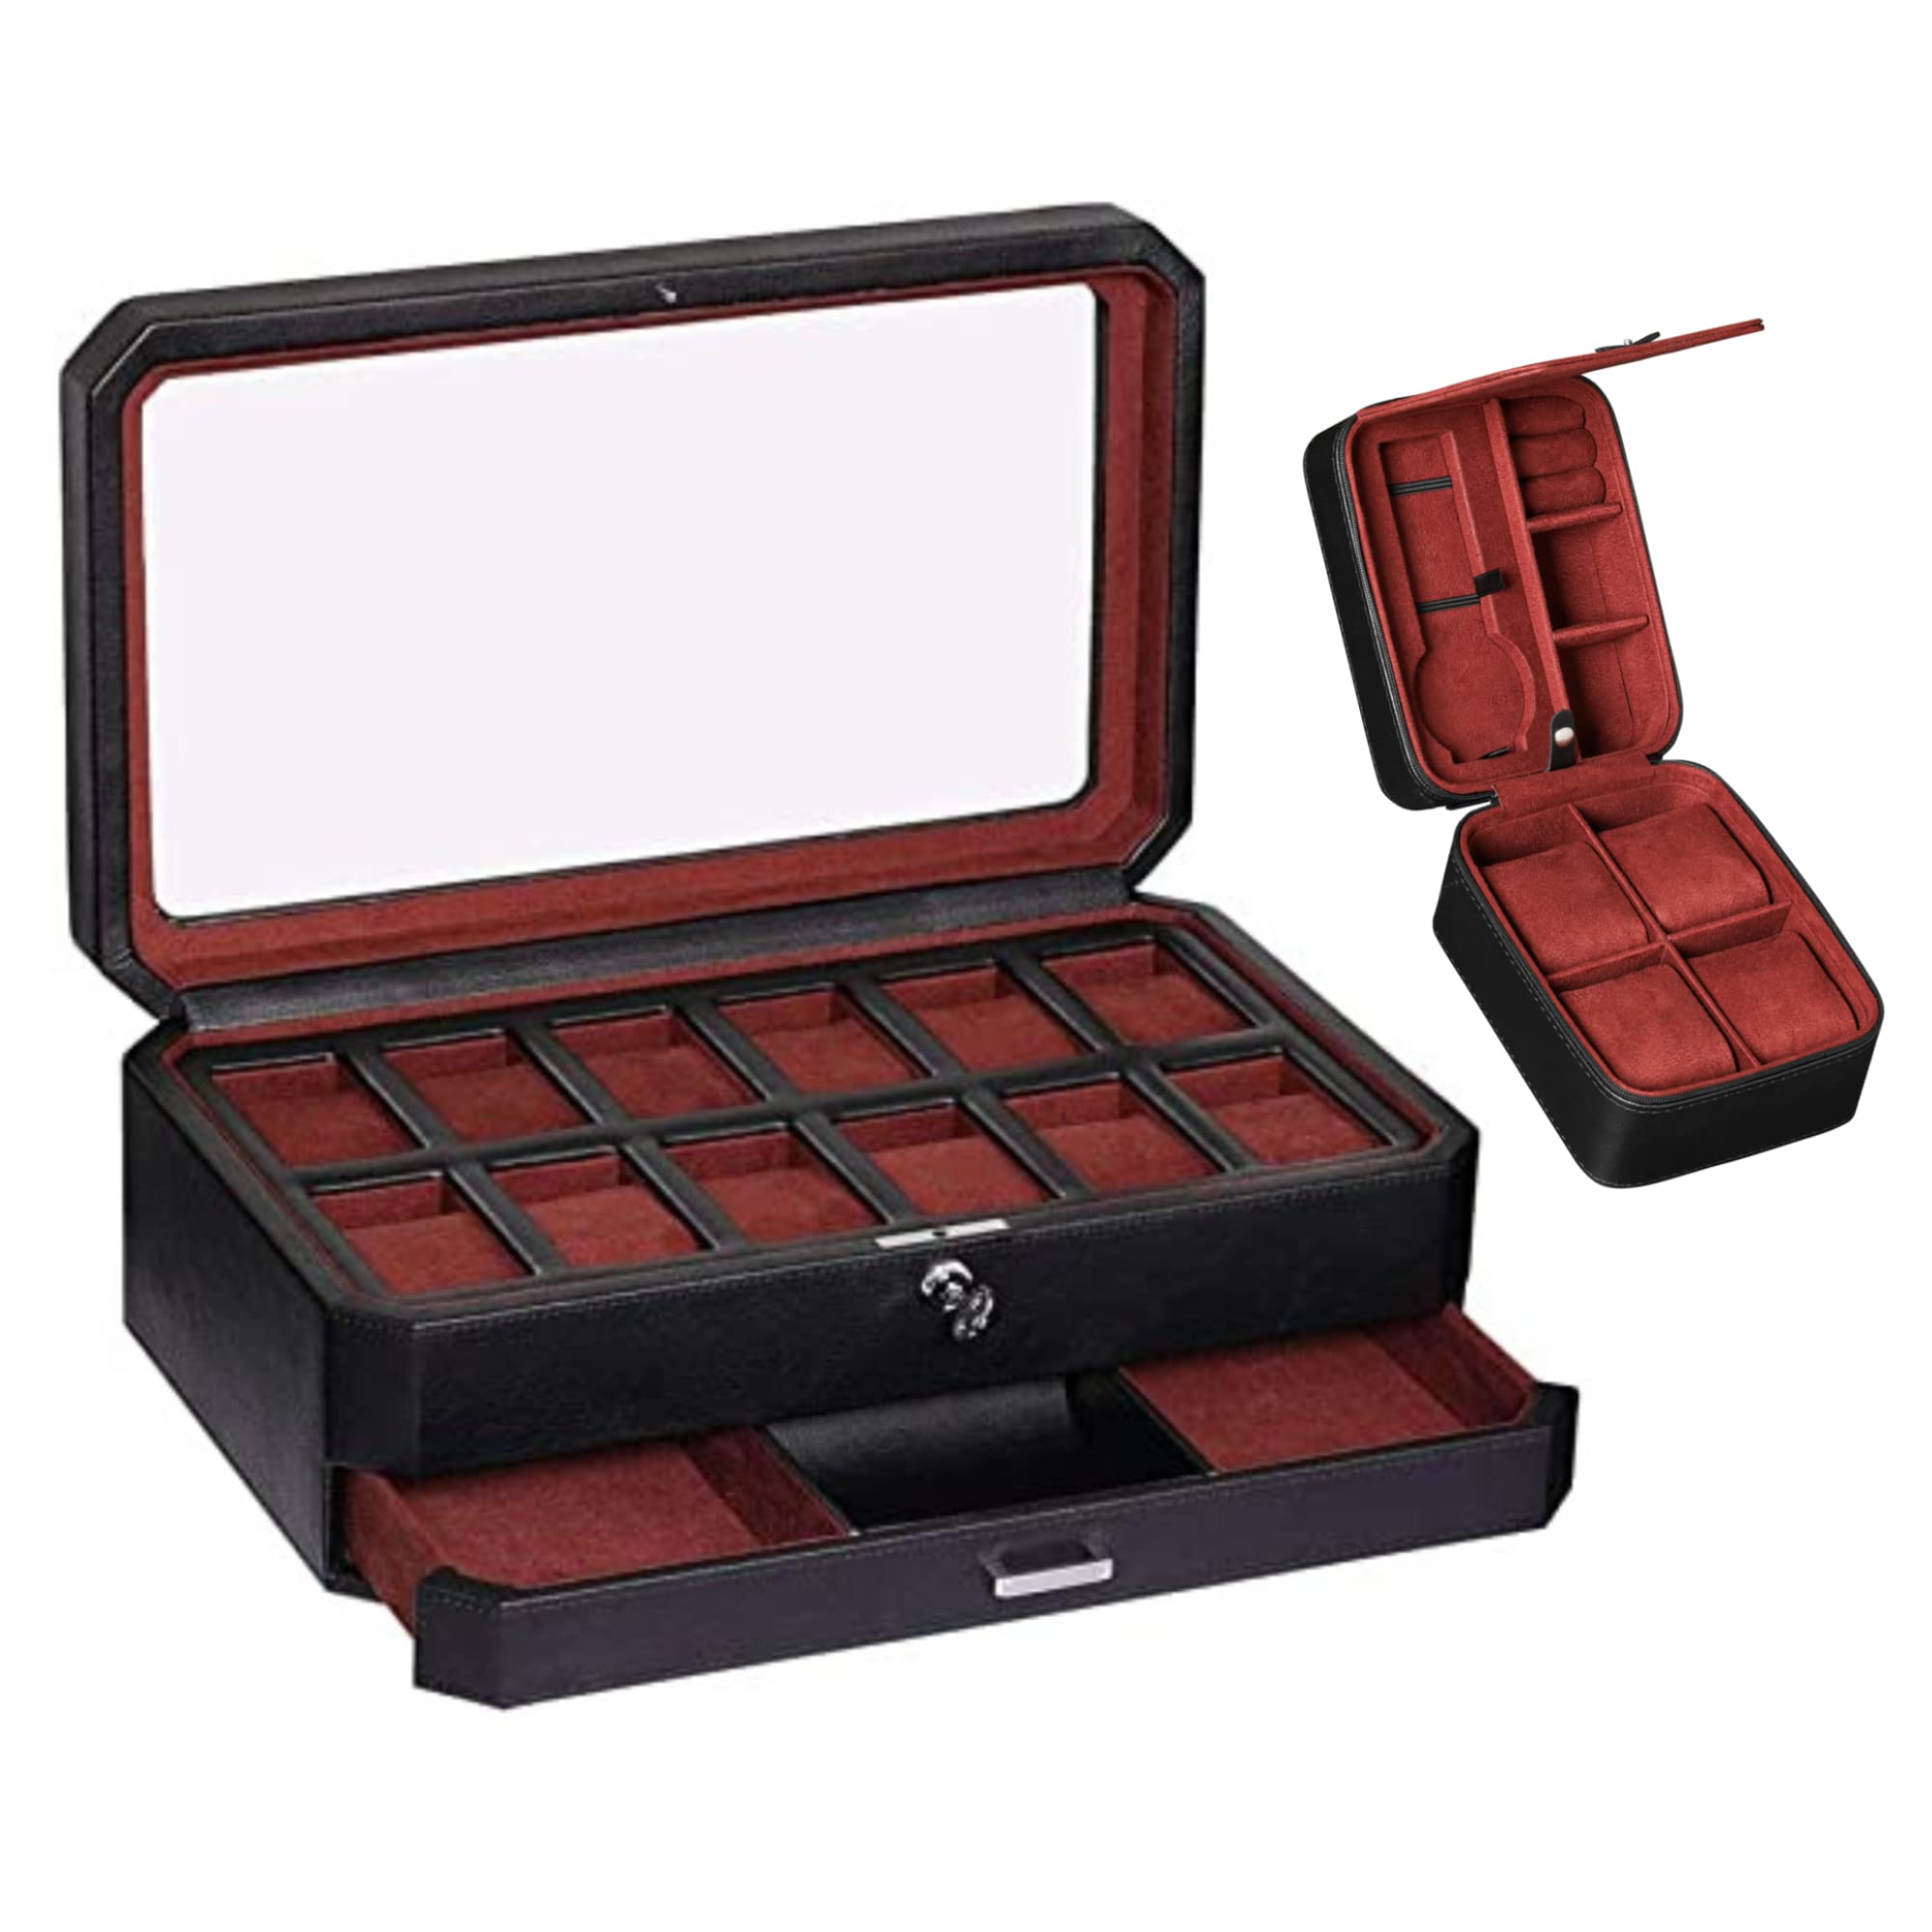 Gift Set 12 Slot Leather Watch Box with Valet Drawer & Matching 5 Watch Travel Case - Luxury Watch Case Display Organizer, Locking Mens Jewelry Watches Holder, Men's Storage Boxes Glass Top Black/Red